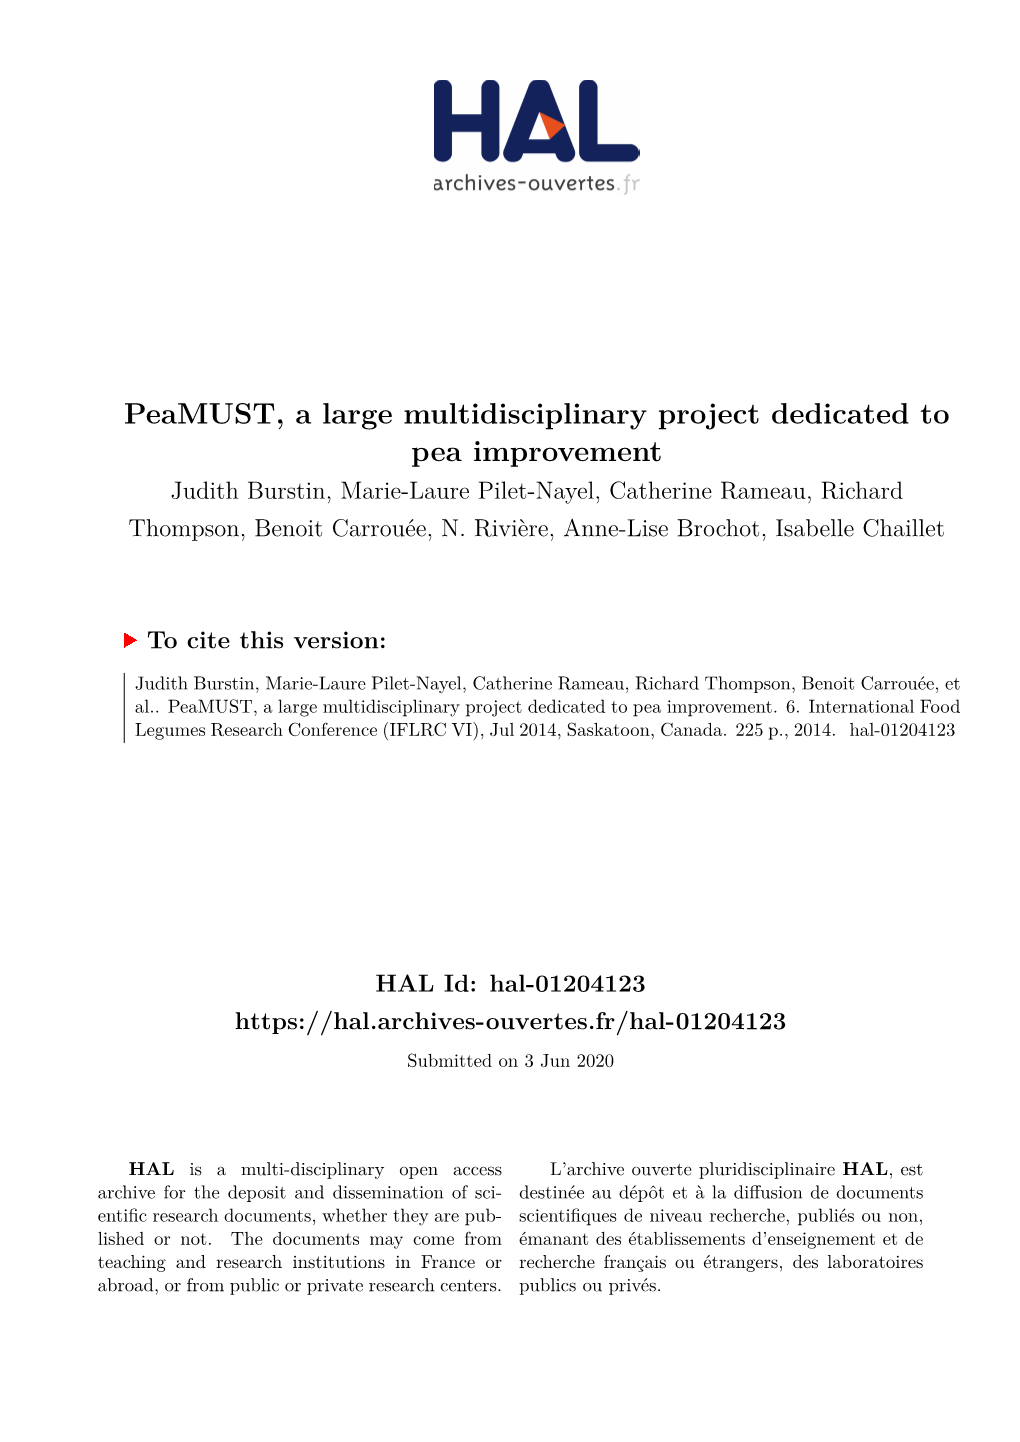 Peamust, a Large Multidisciplinary Project Dedicated to Pea Improvement